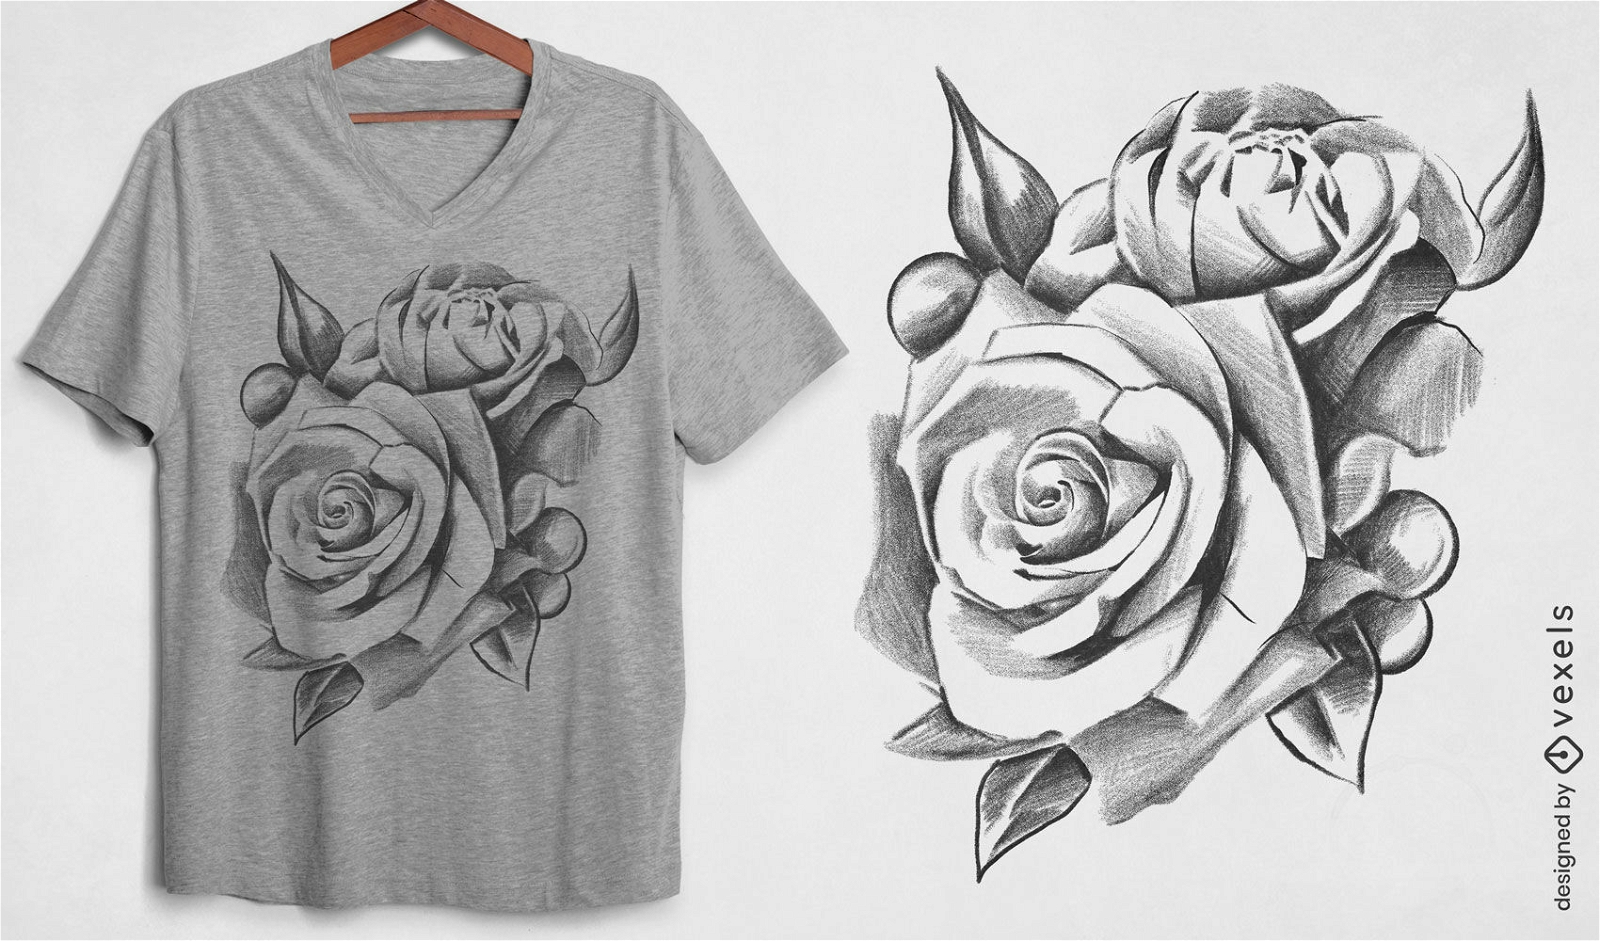 Shaded rose and pearls t-shirt design